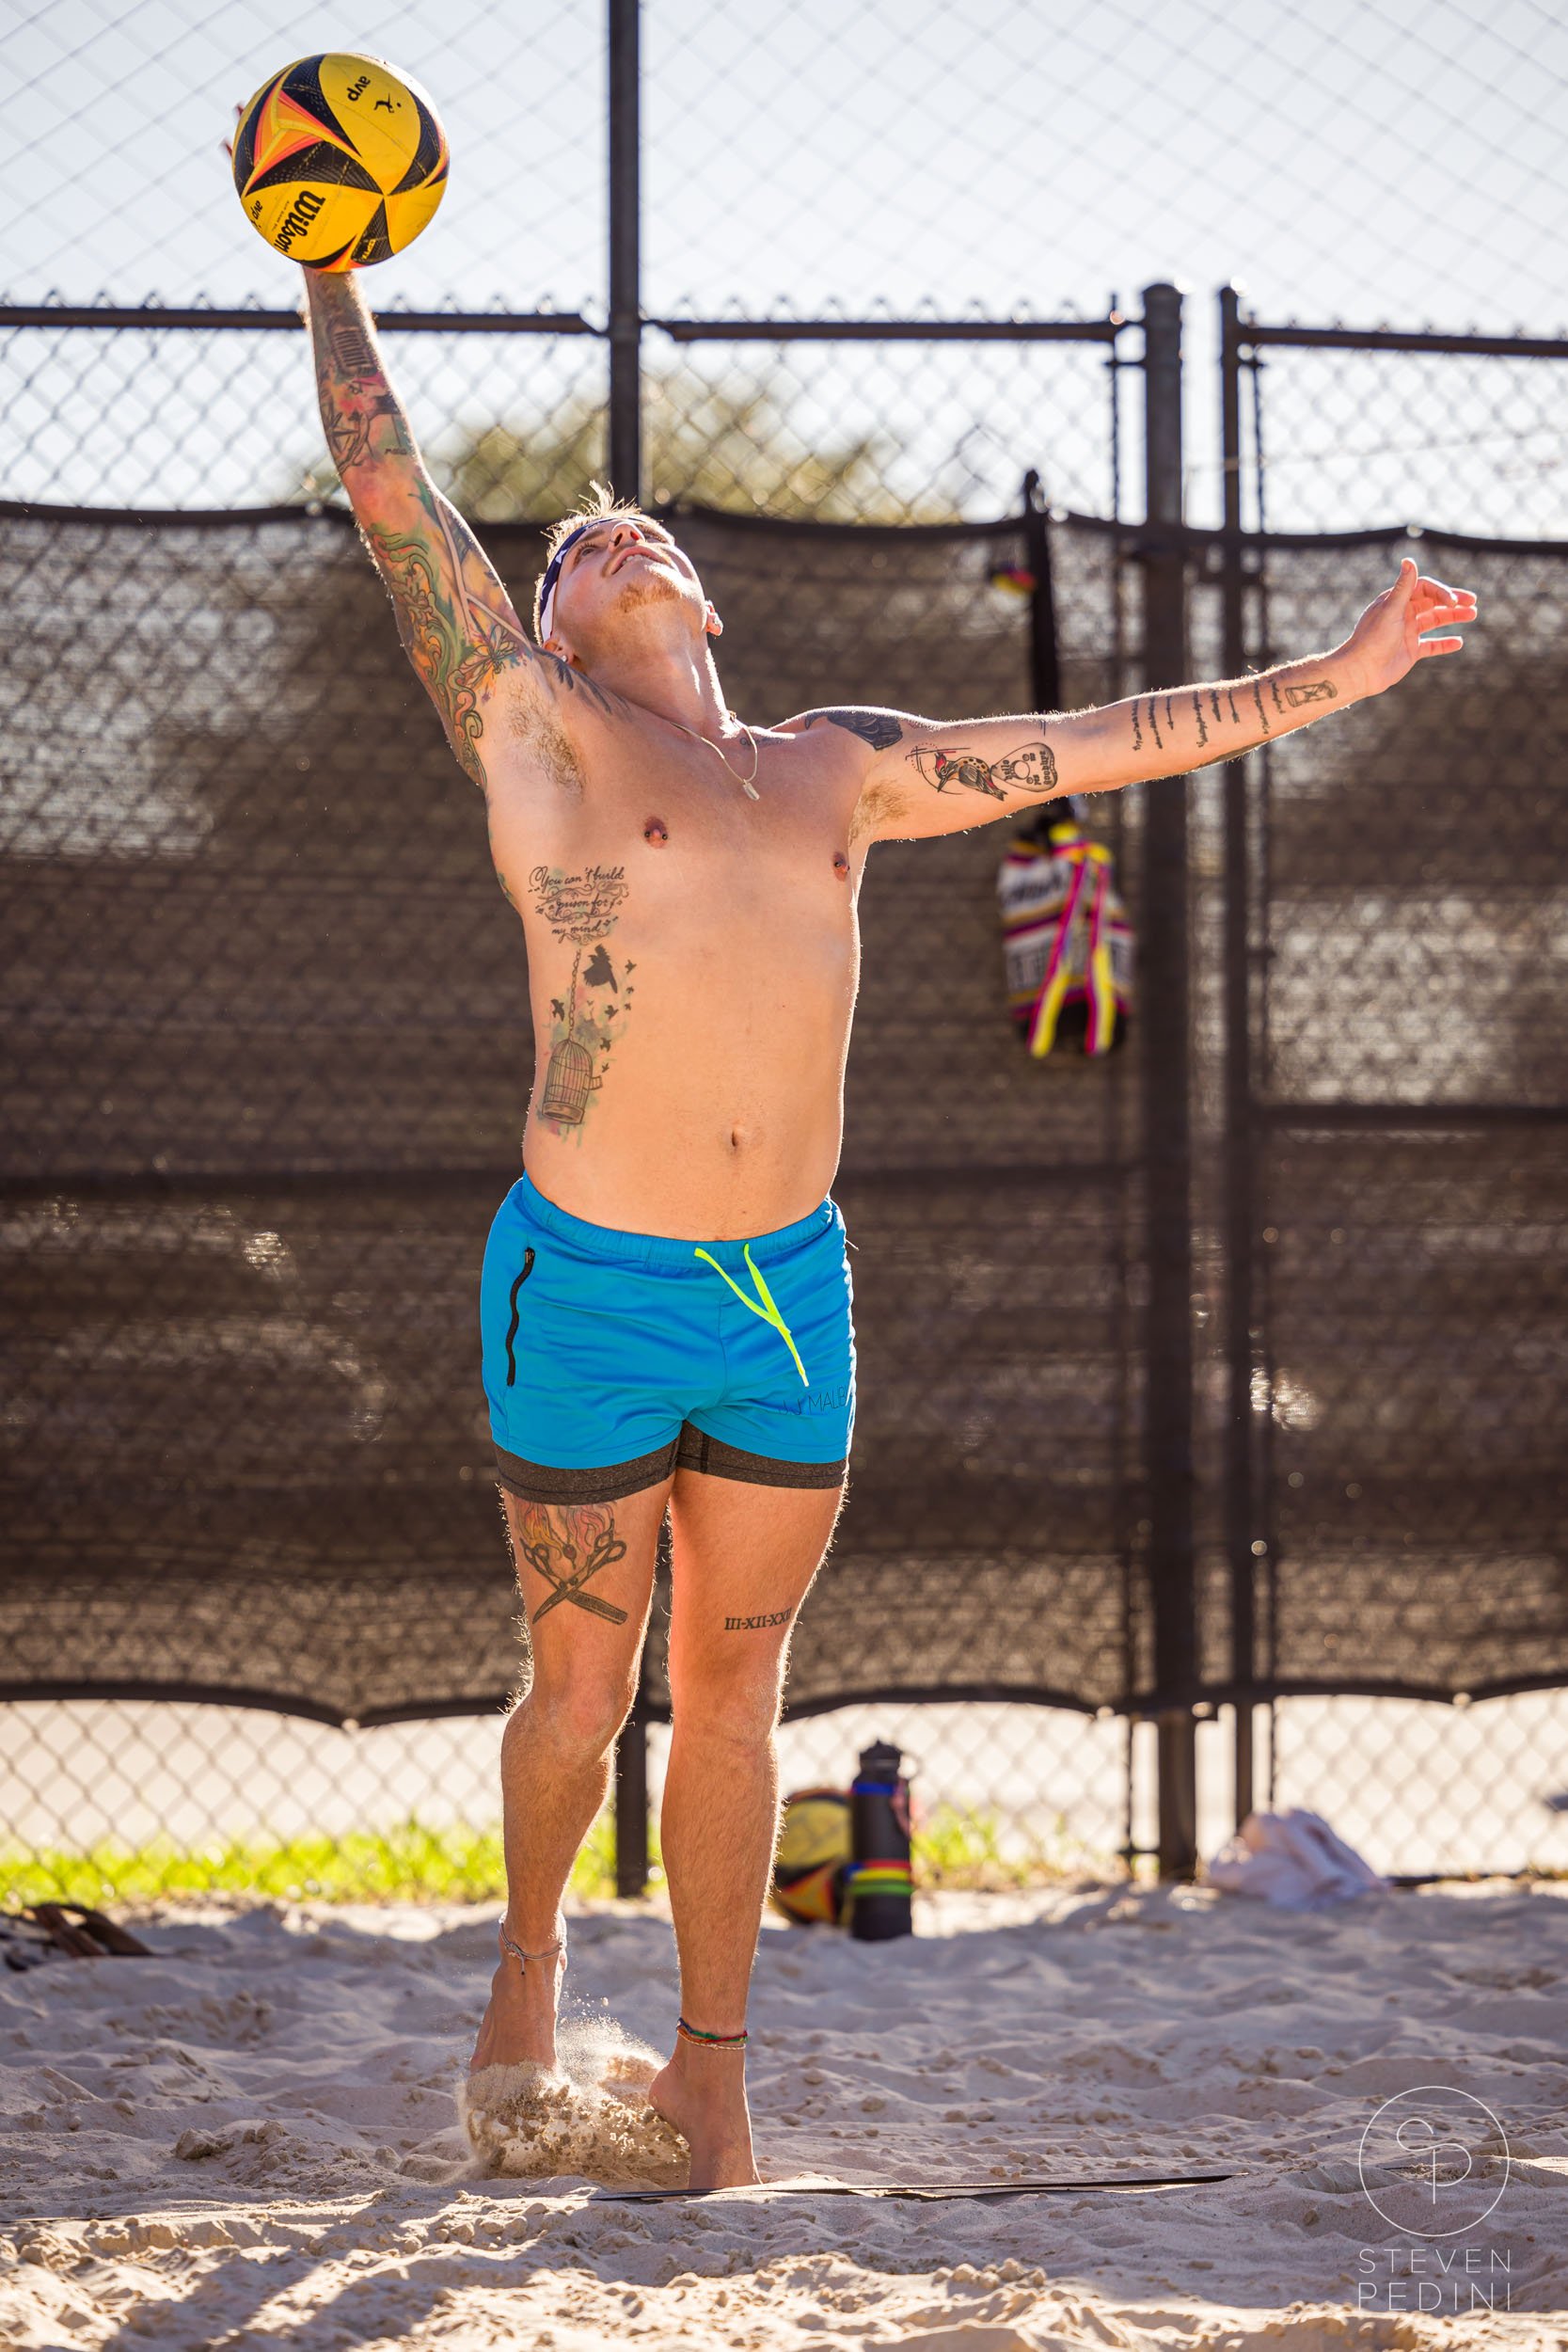 Steven Pedini Photography - Bumpy Pickle - Sand Volleyball - Houston TX - World Cup of Volleyball - 00035.jpg